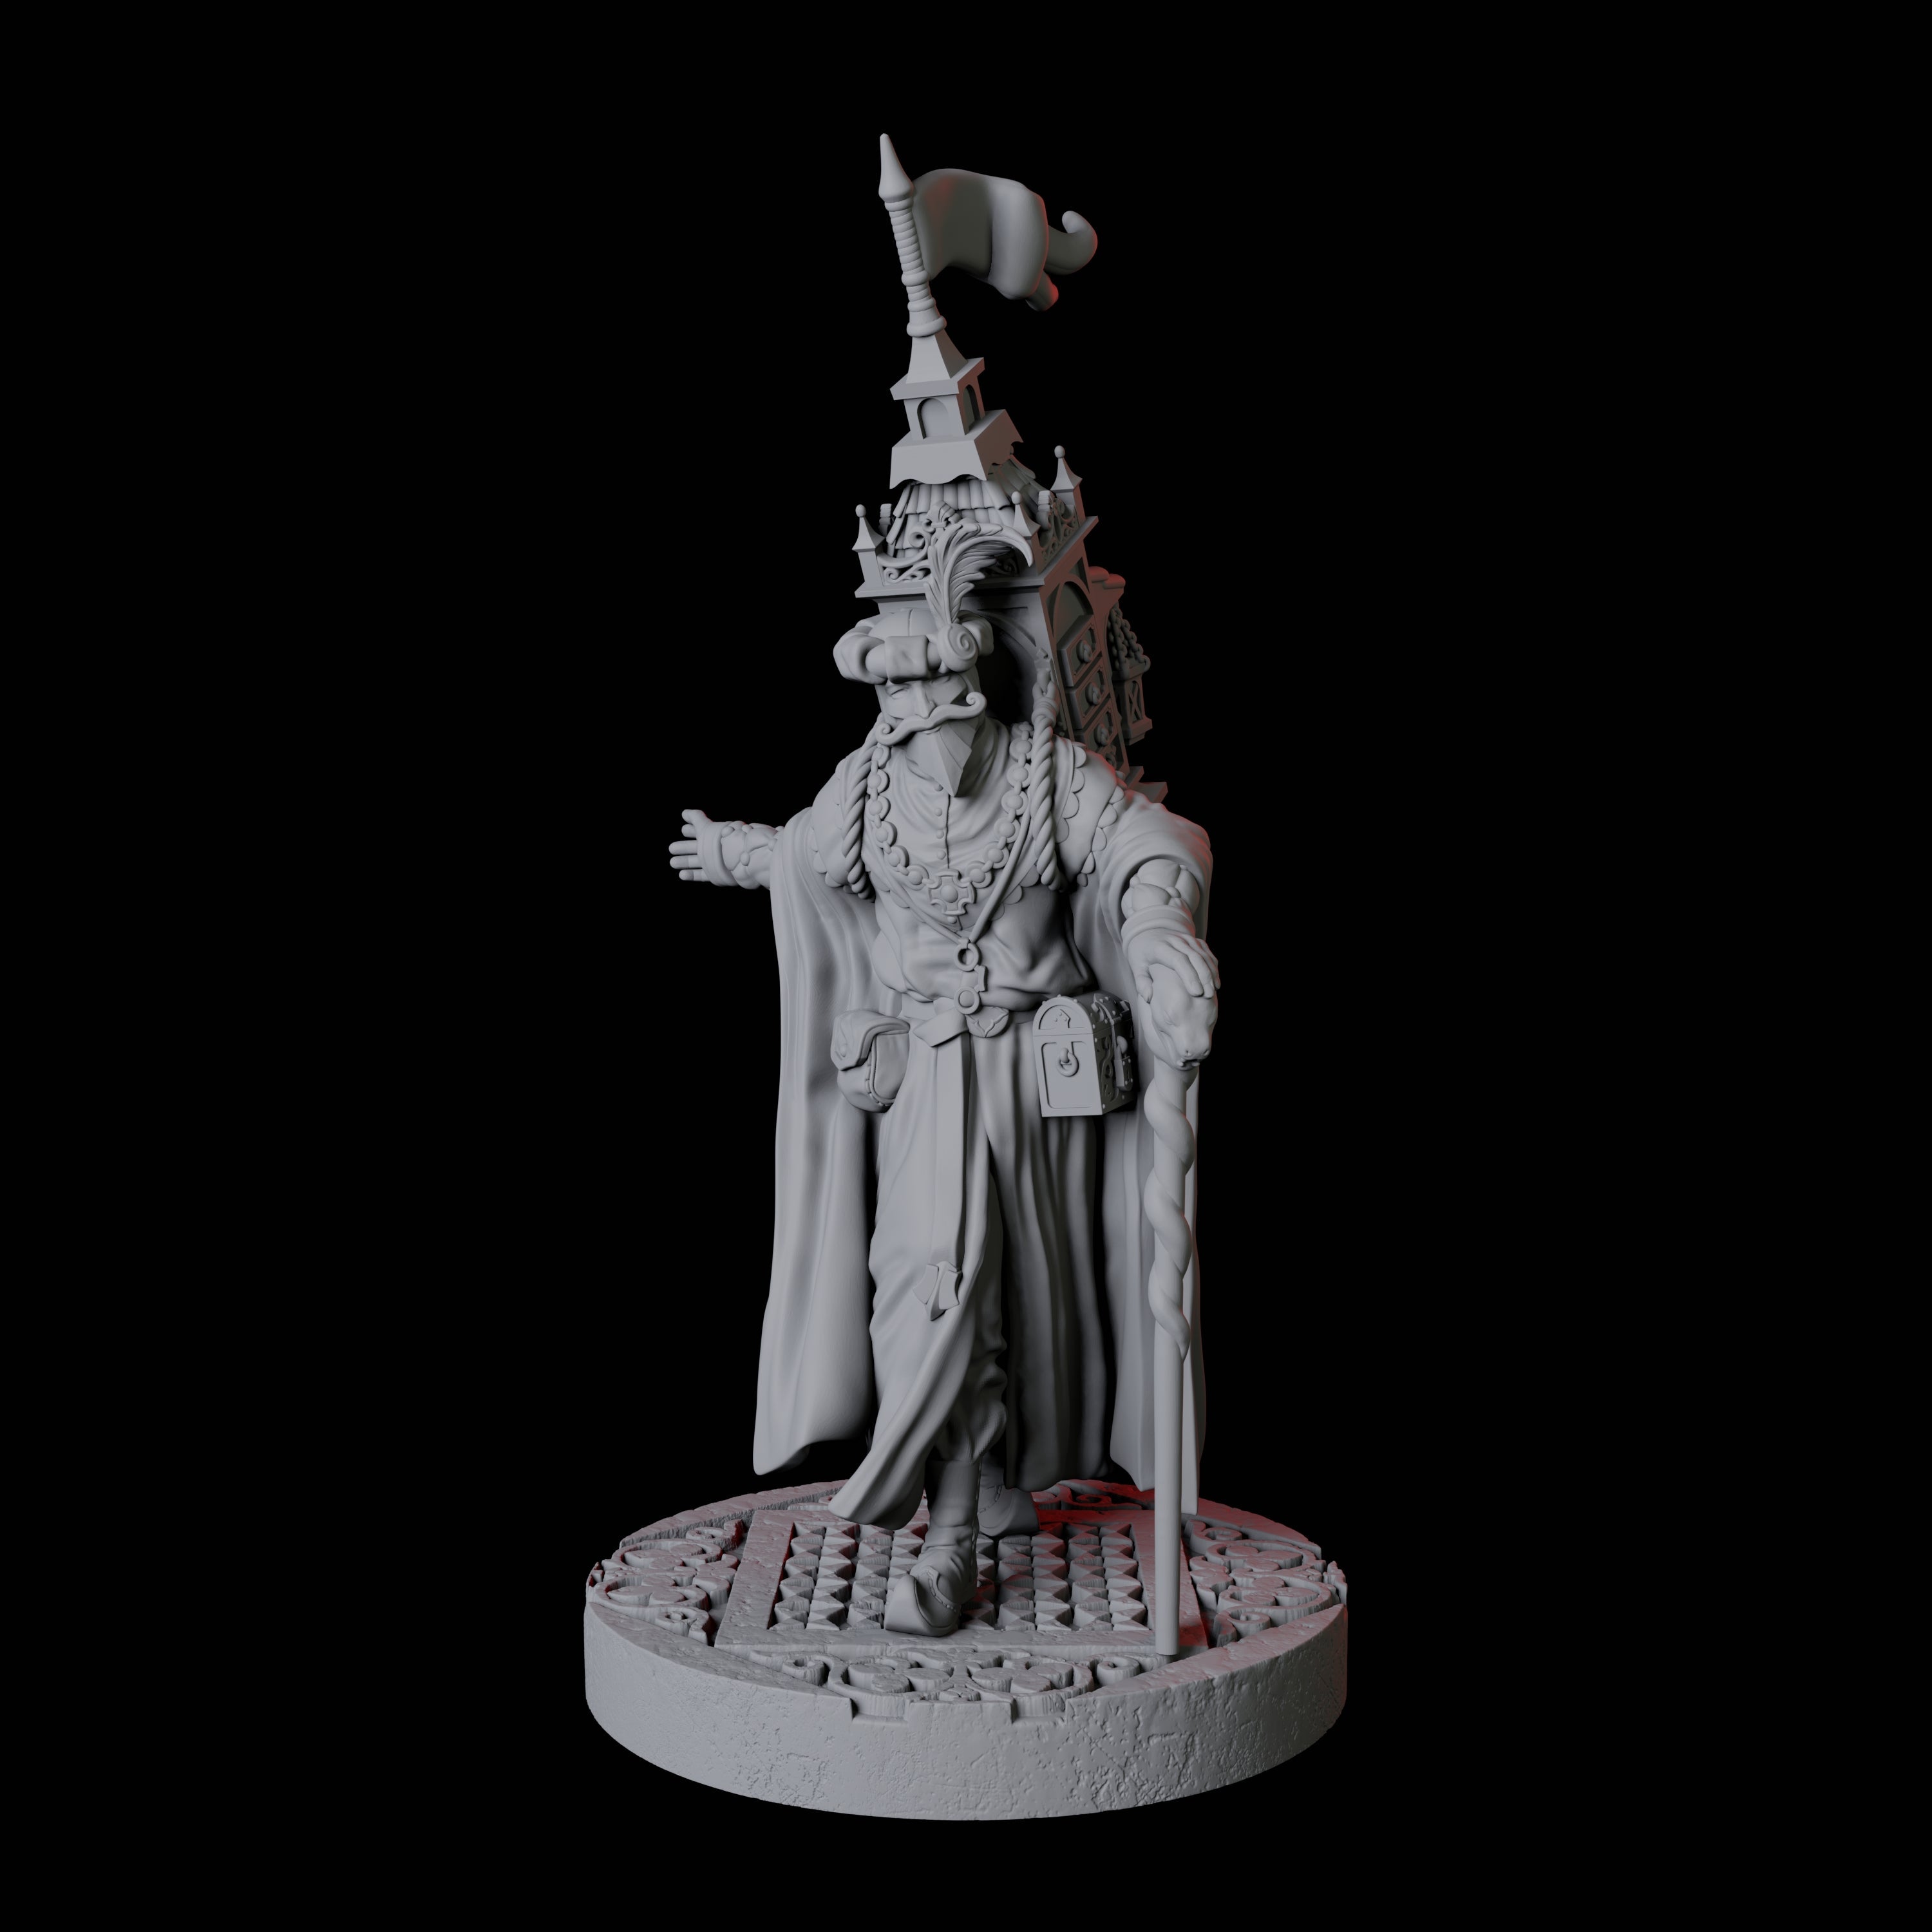 Travelling Merchant of Curios Miniature for Dungeons and Dragons, Pathfinder or other TTRPGs